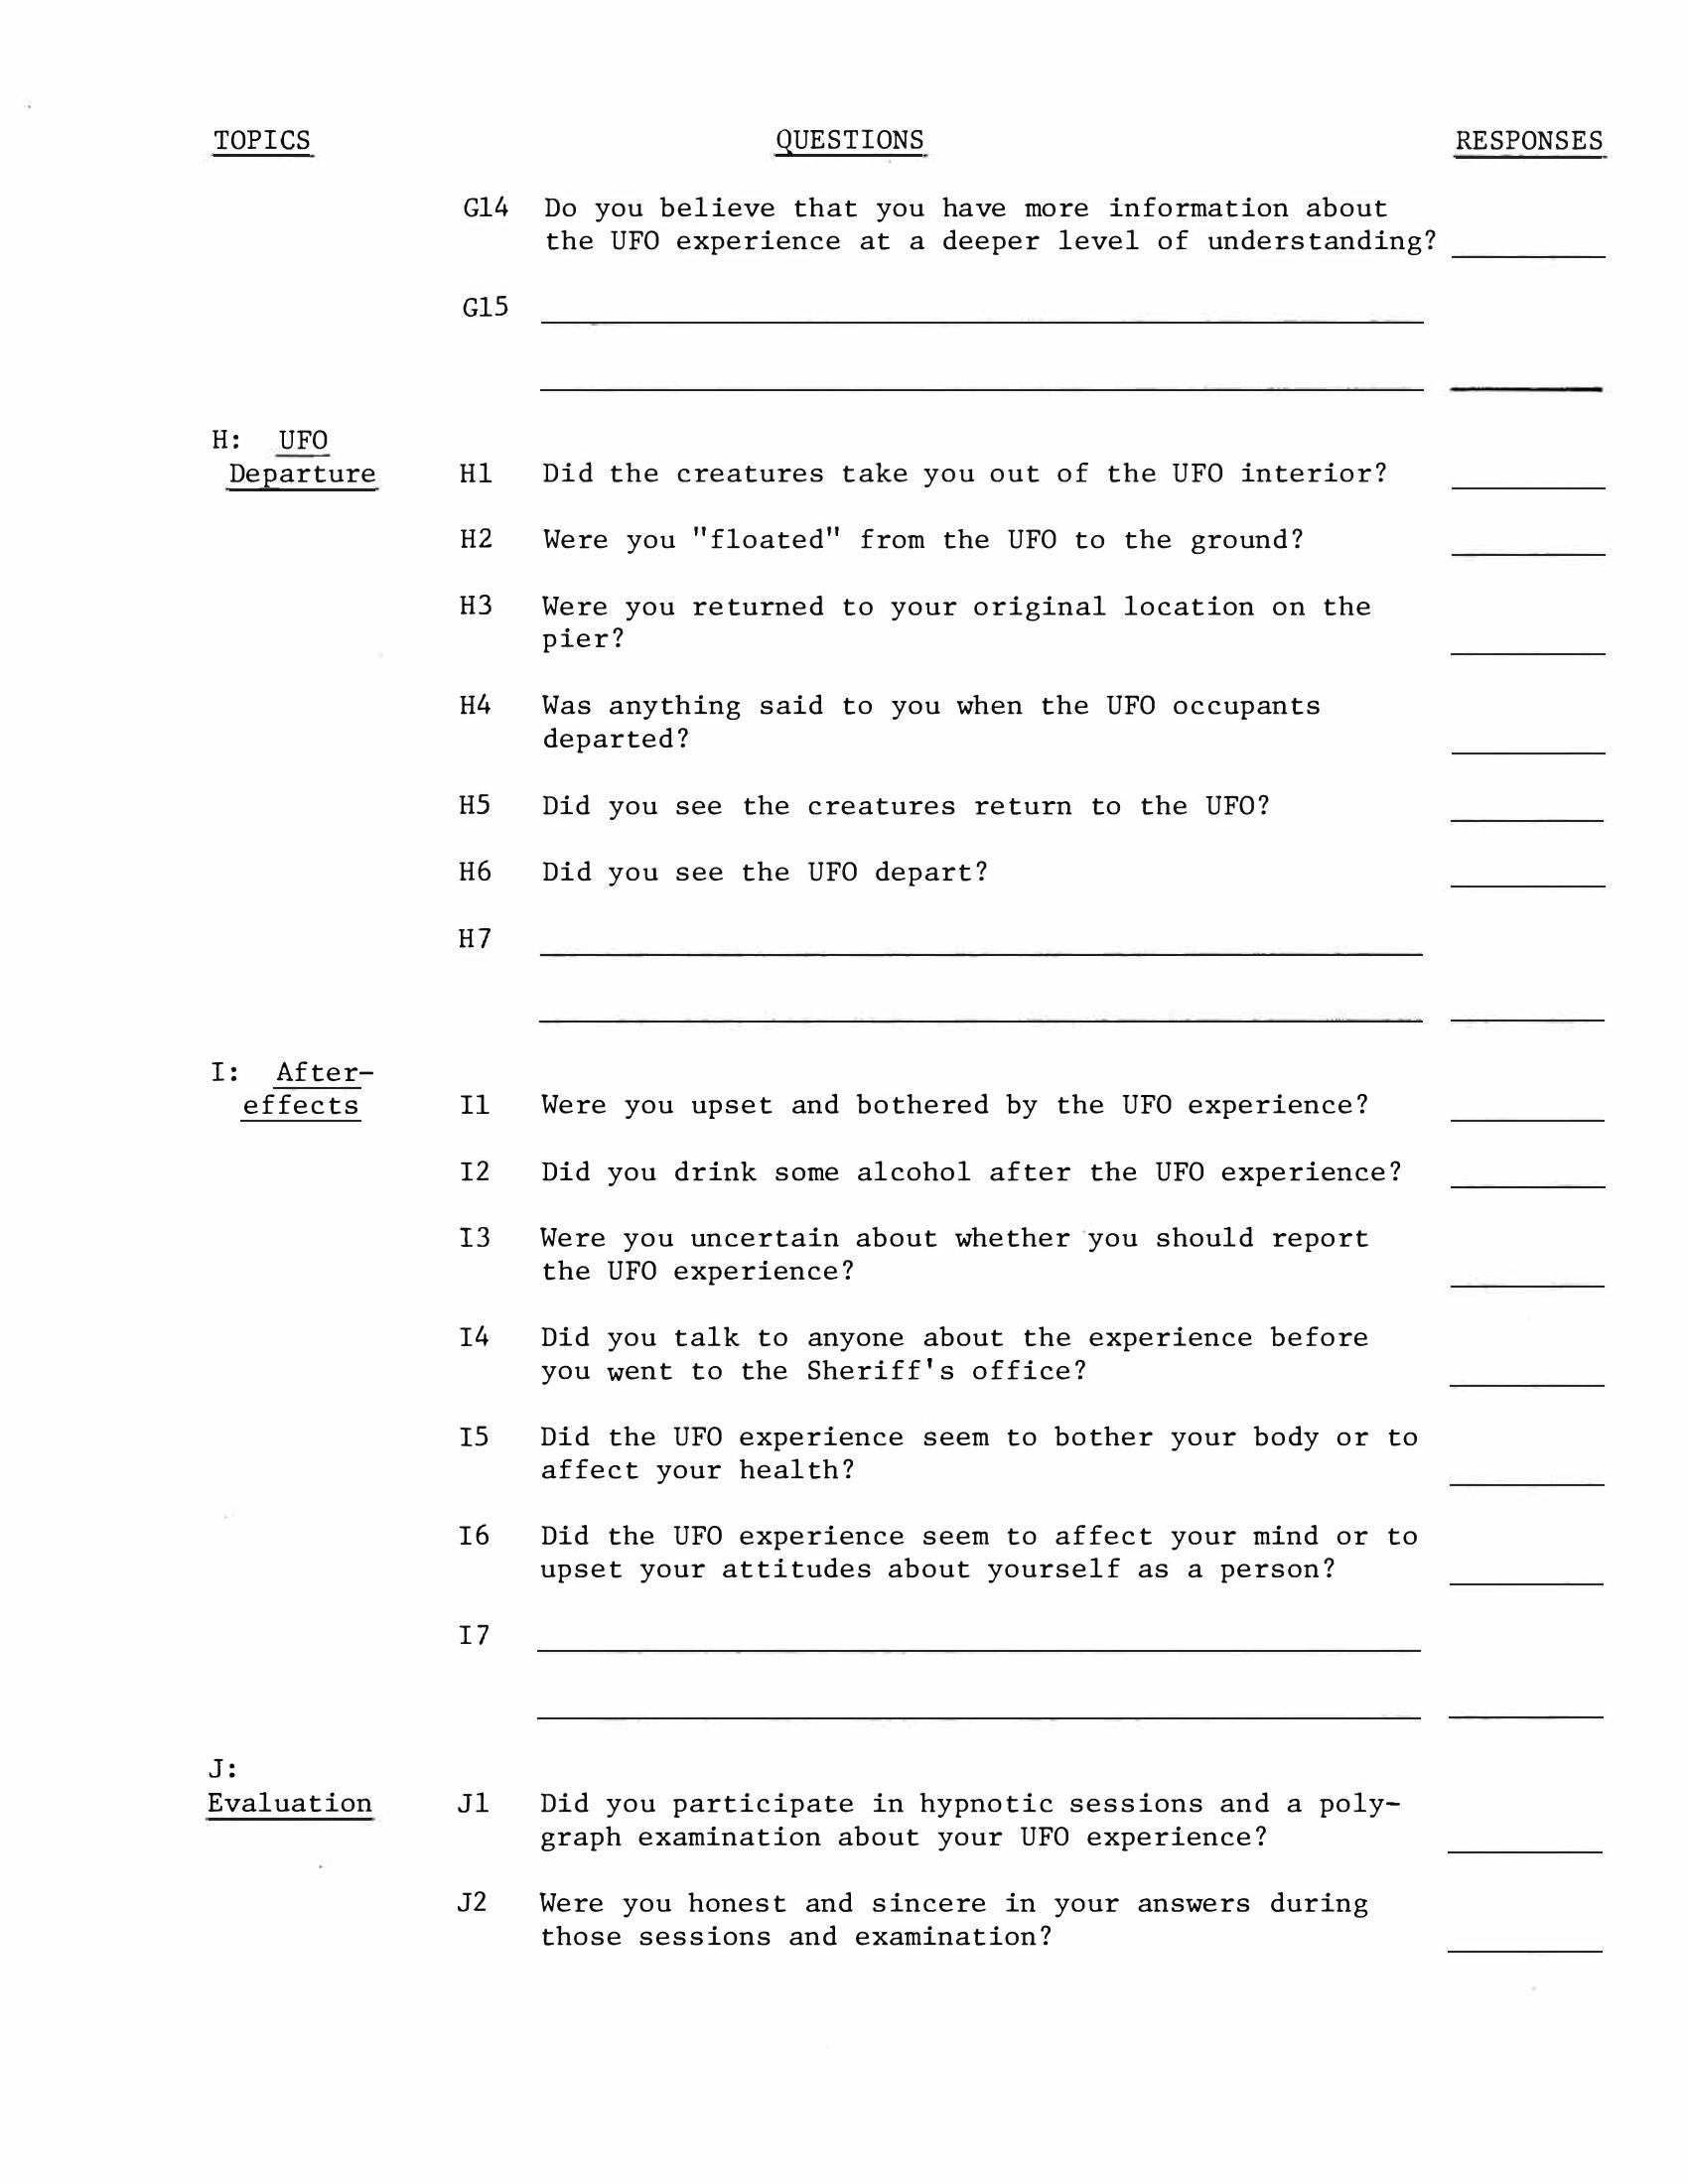 Dr. Sprinkle Questions Page-5